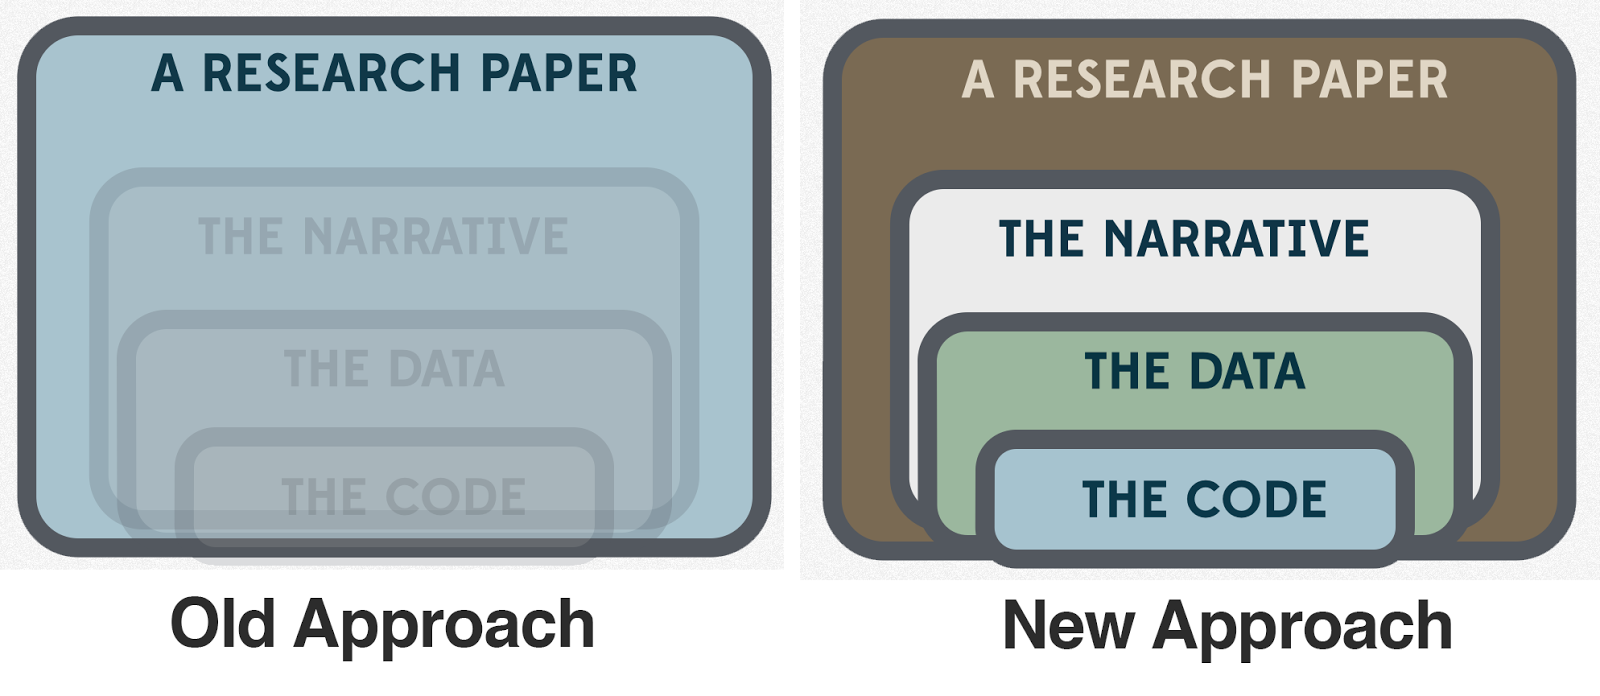 Infographic on research papers